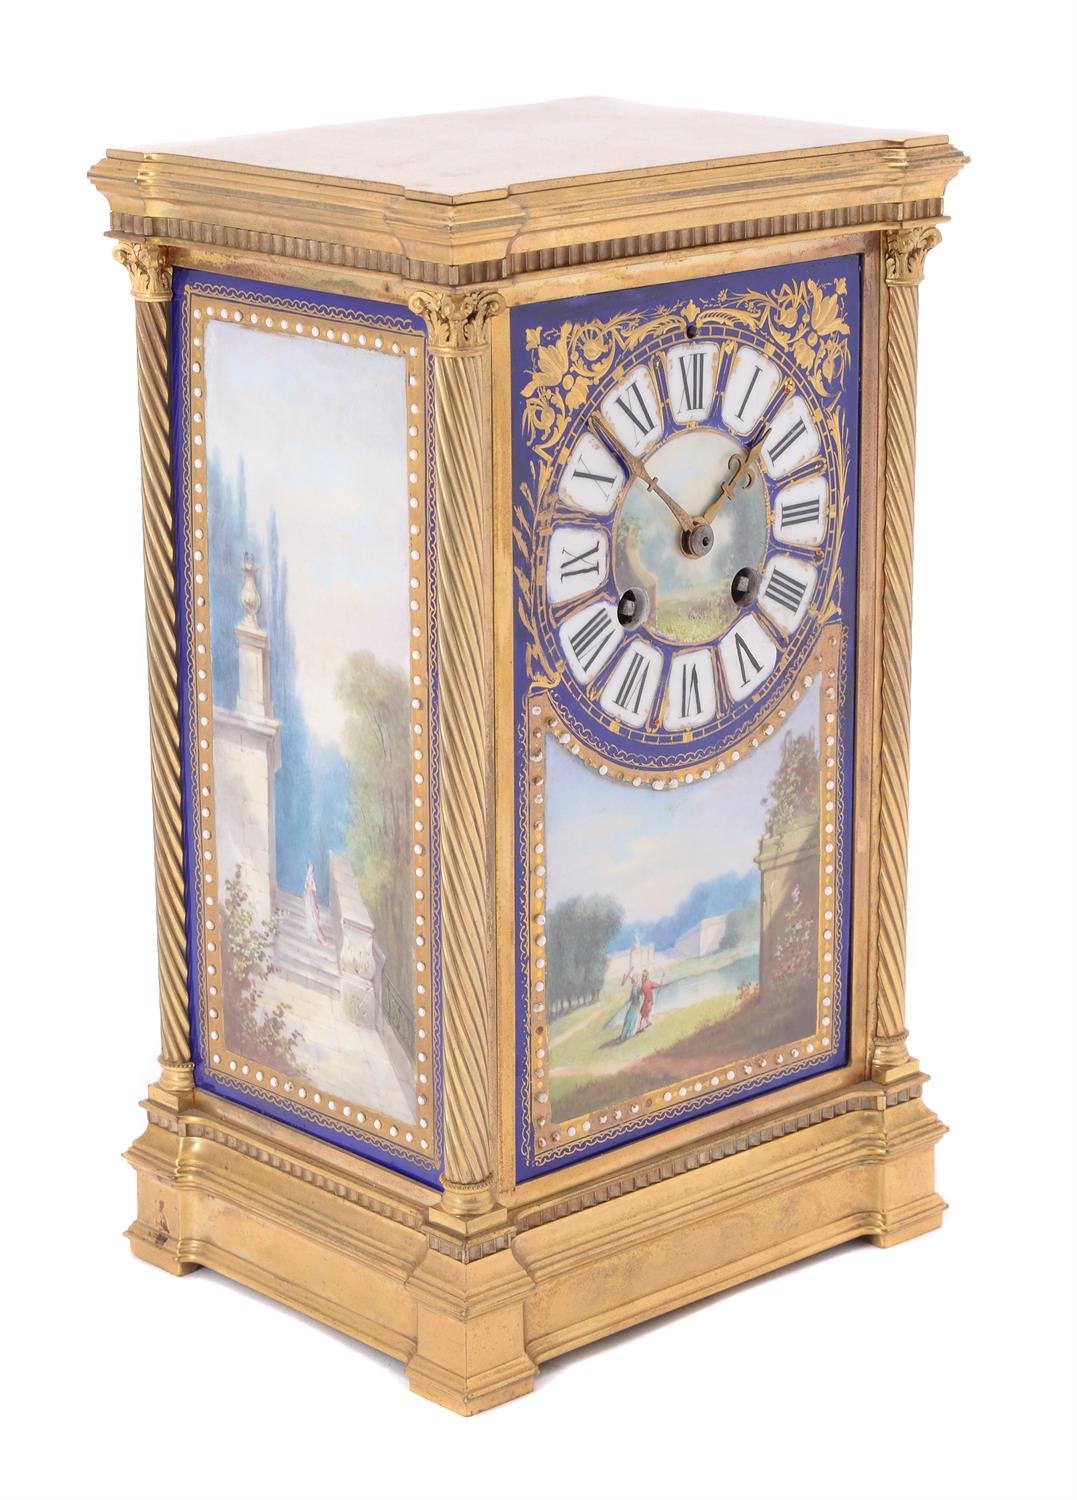 A French Sevres style porcelain and gilt metal library clock - Image 2 of 3